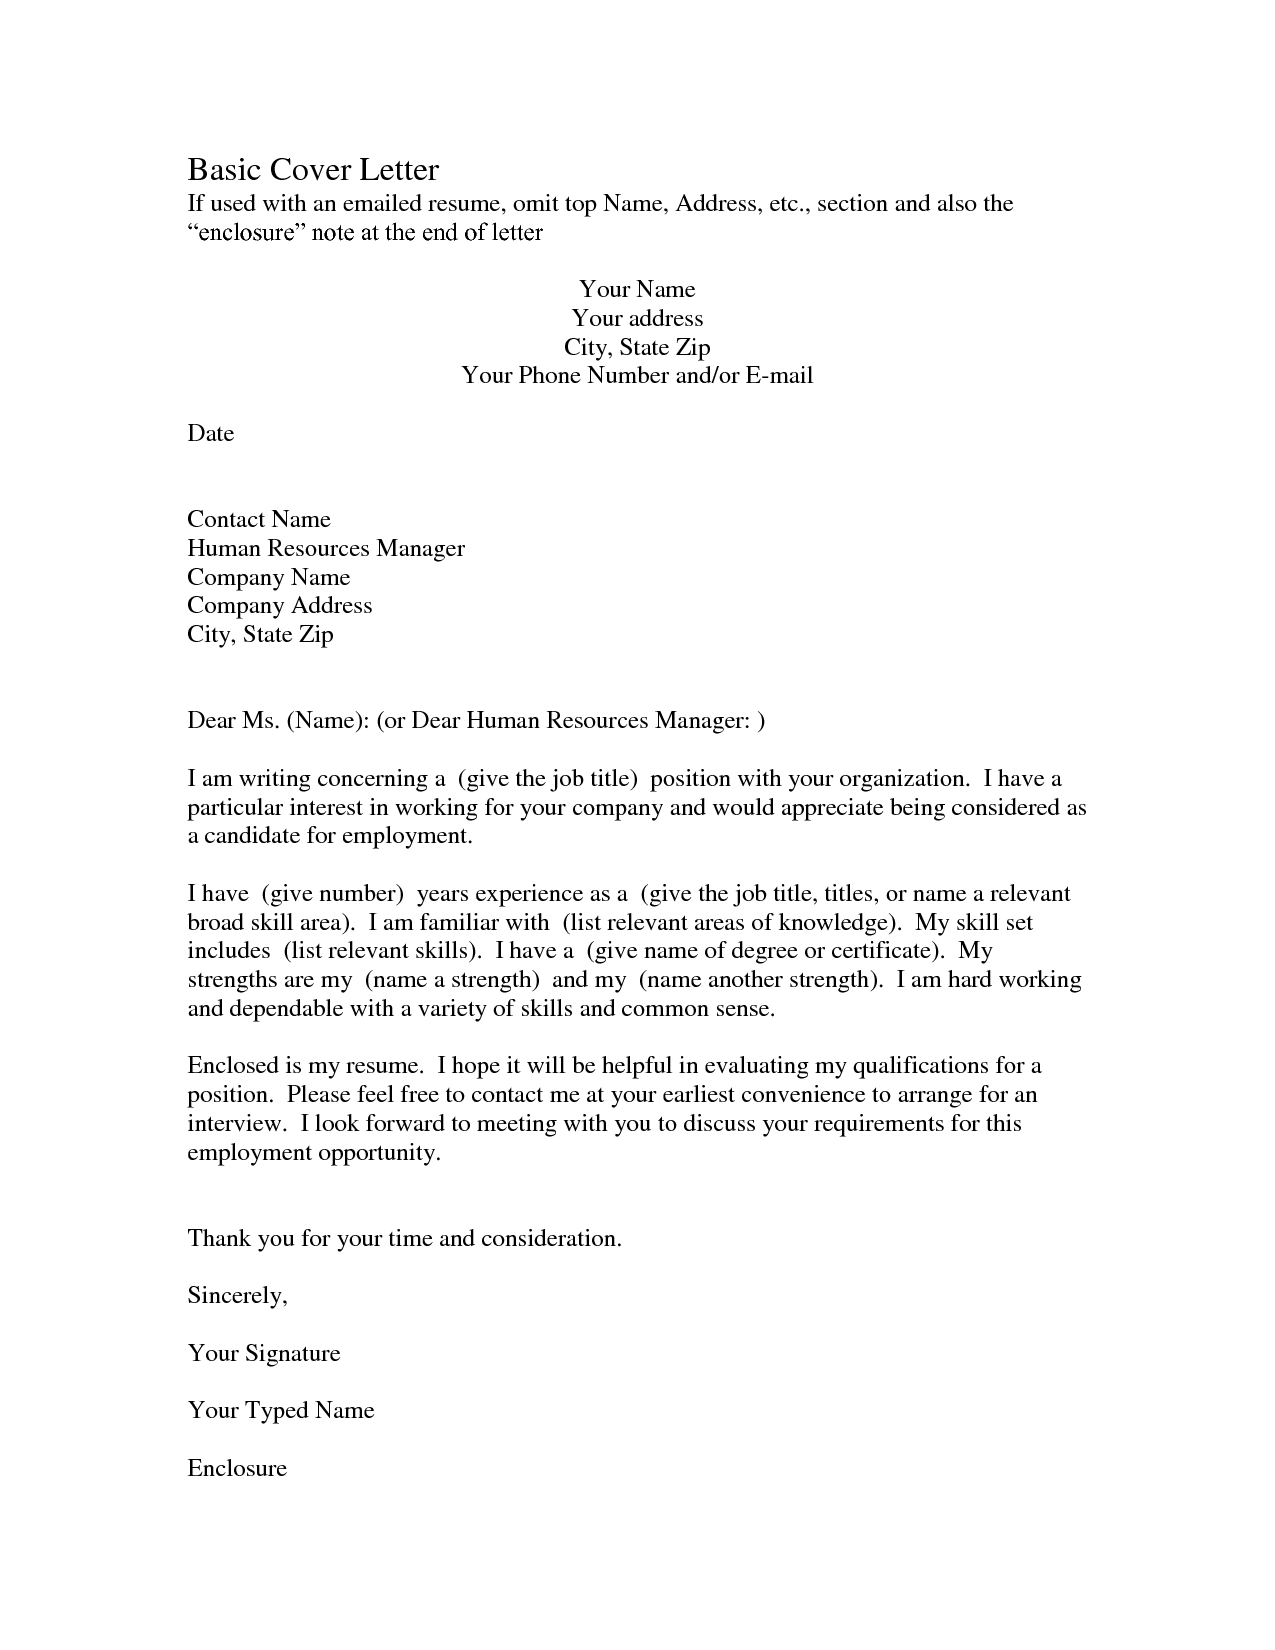 Genetic Counseling Letter Template - This Cover Letter Sample Shows How A Resumes for Teachers Can Help